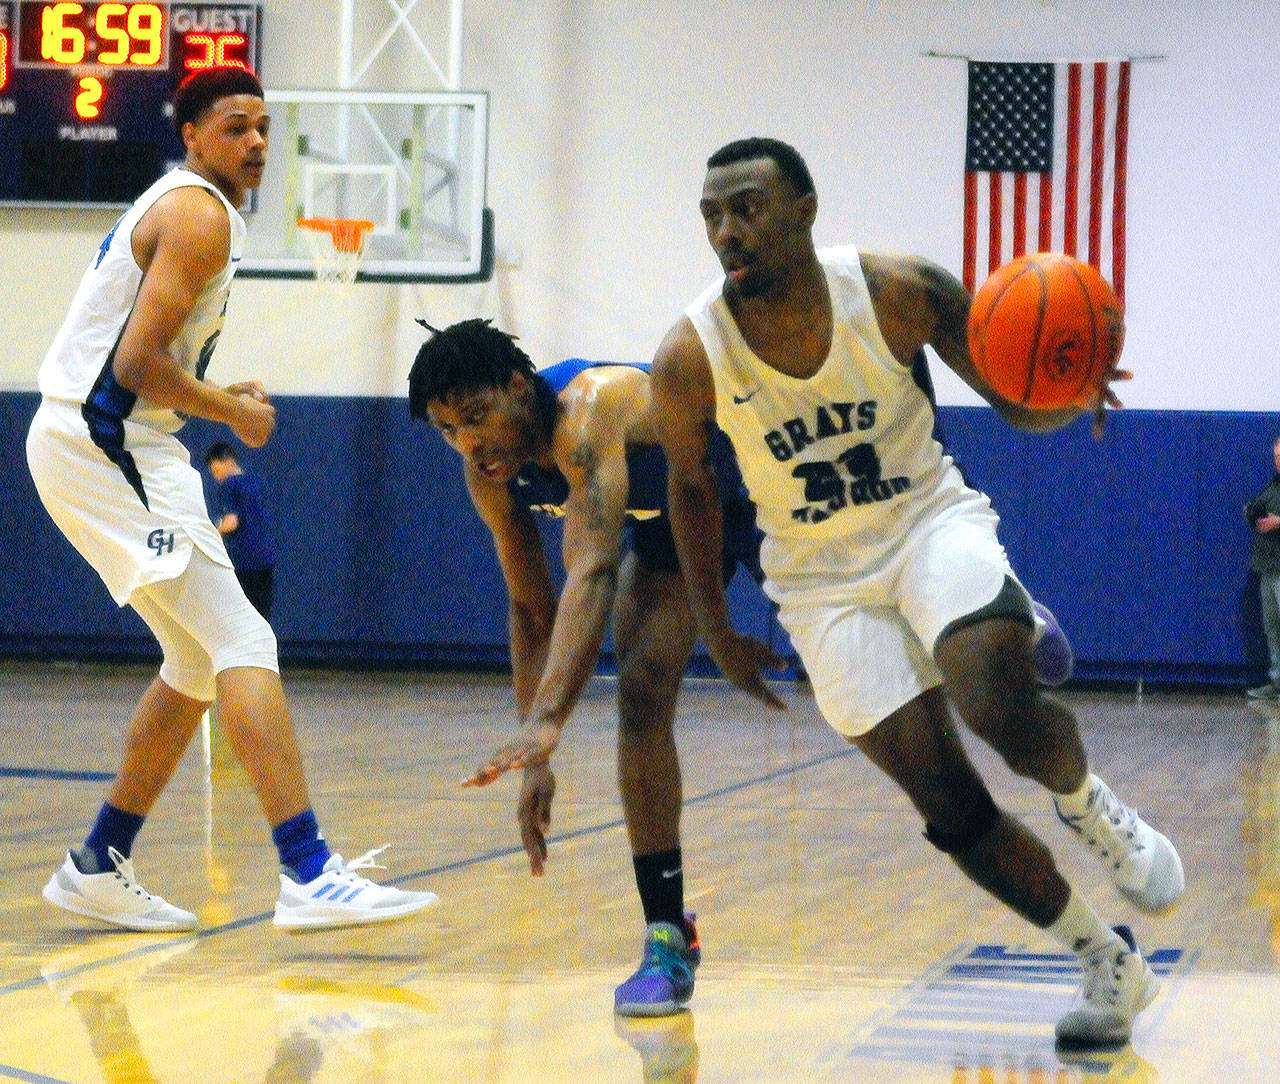 Jordan Gardner, right, drives to the hoop after getting a screen from Carl Fsicher, left, in the second half against Centralia. (Hasani Grayson | Grays Harbor News Group)